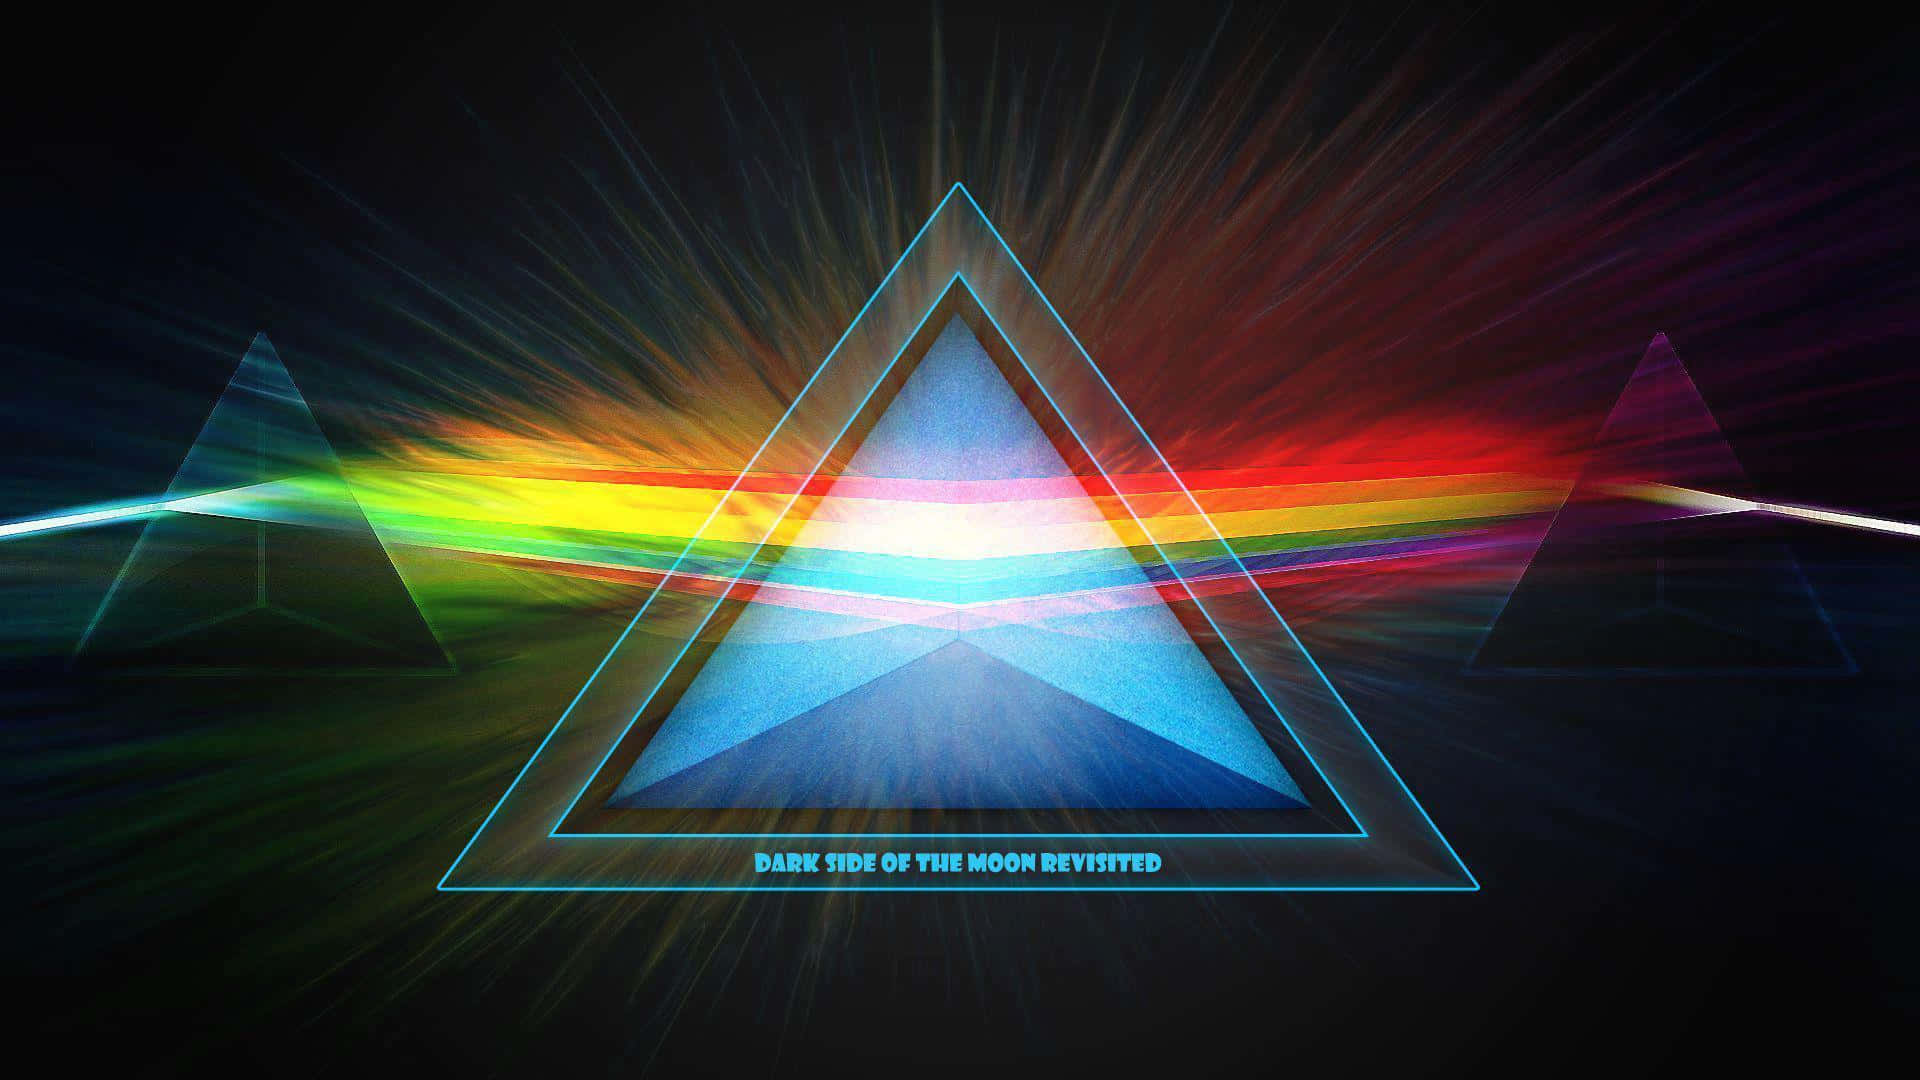 With one of the most iconic and symbolic covers, Dark Side of the Moon stays timeless. Wallpaper